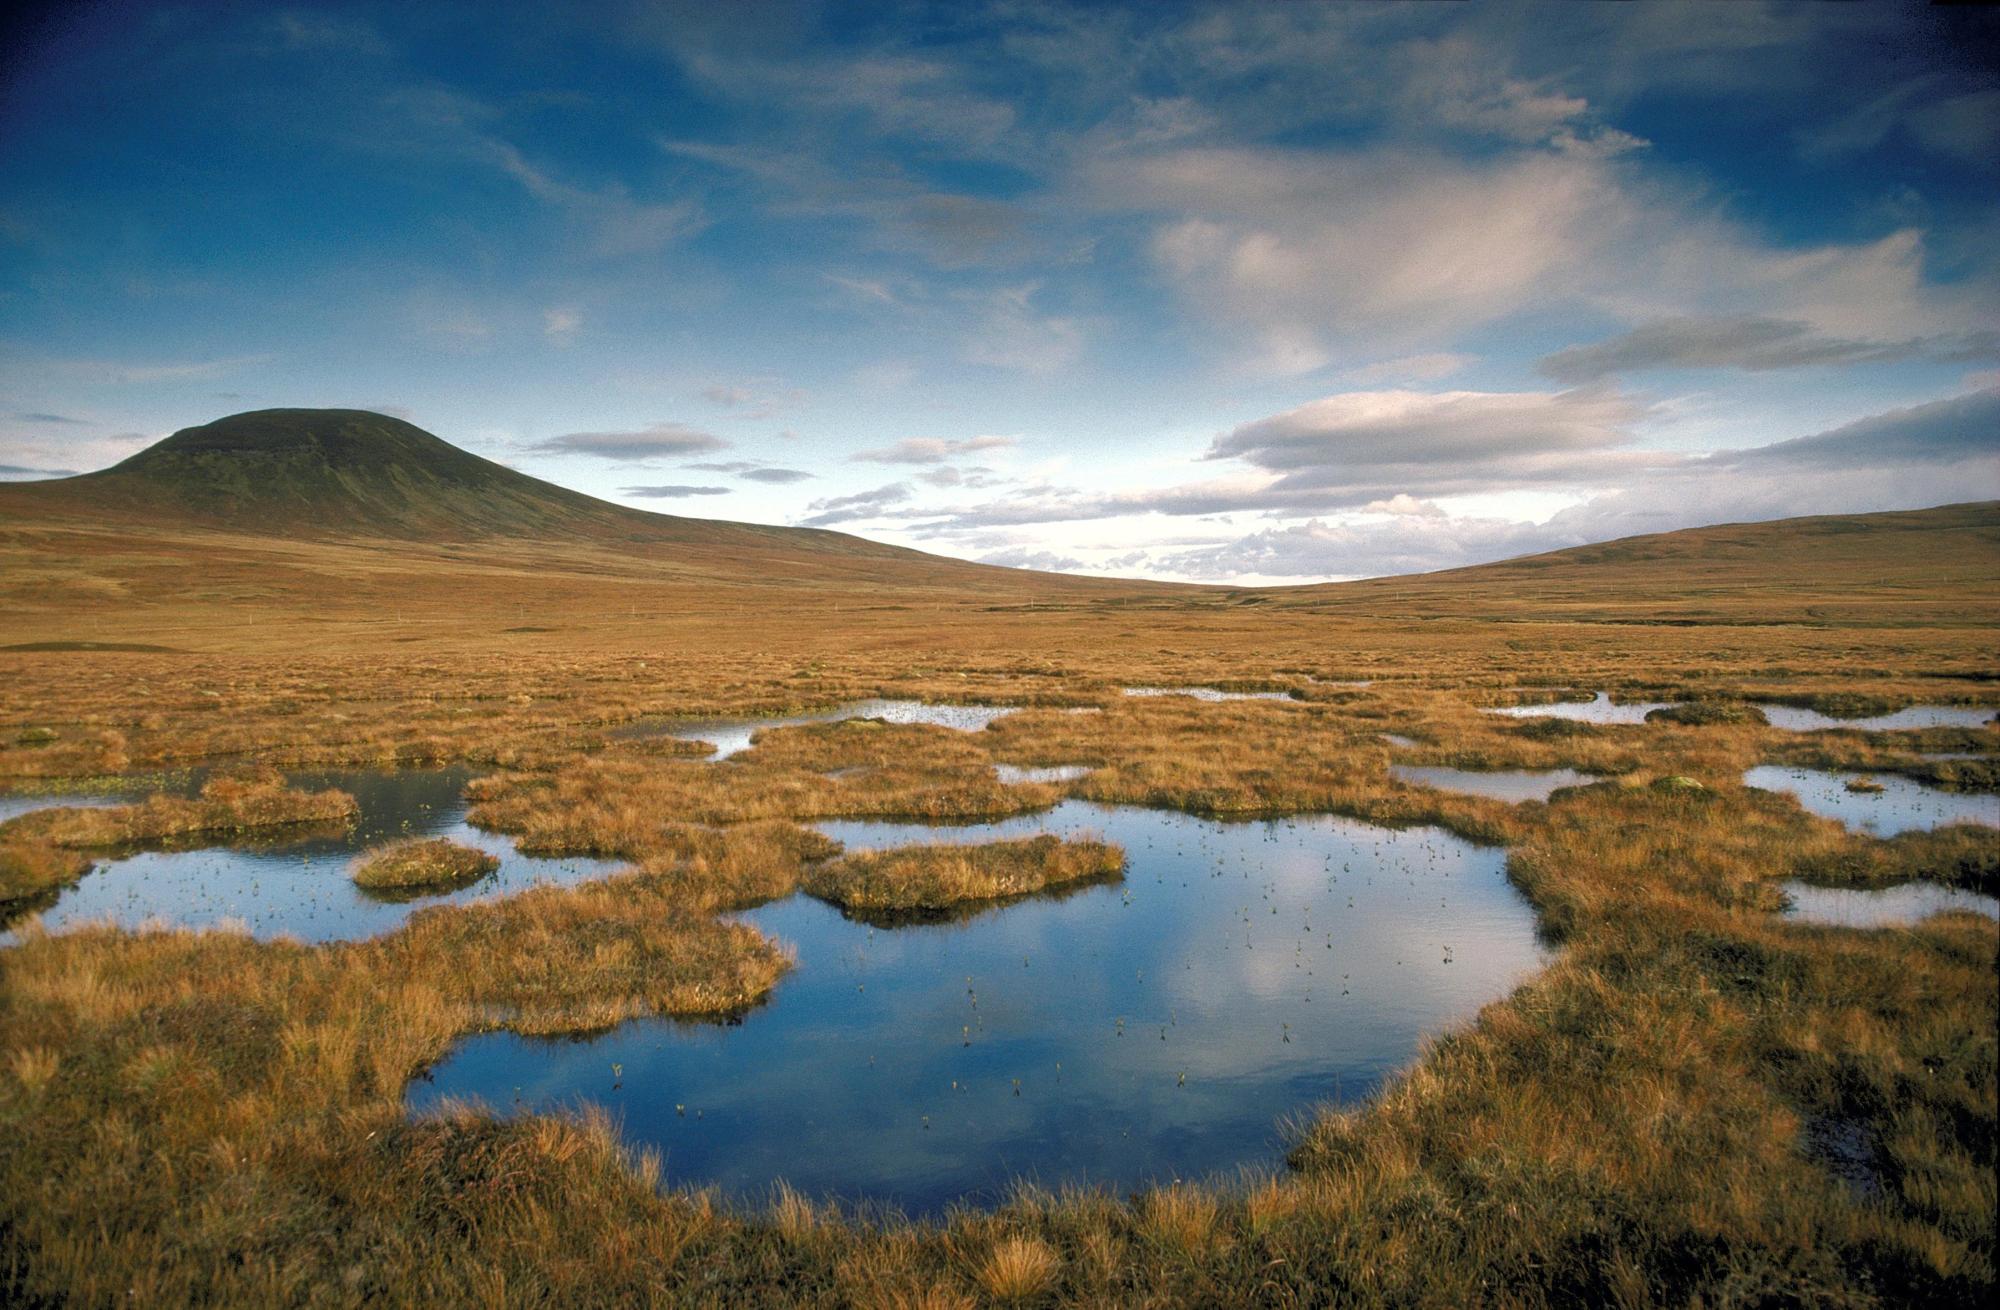 Area of blanket bog with mountains in the background